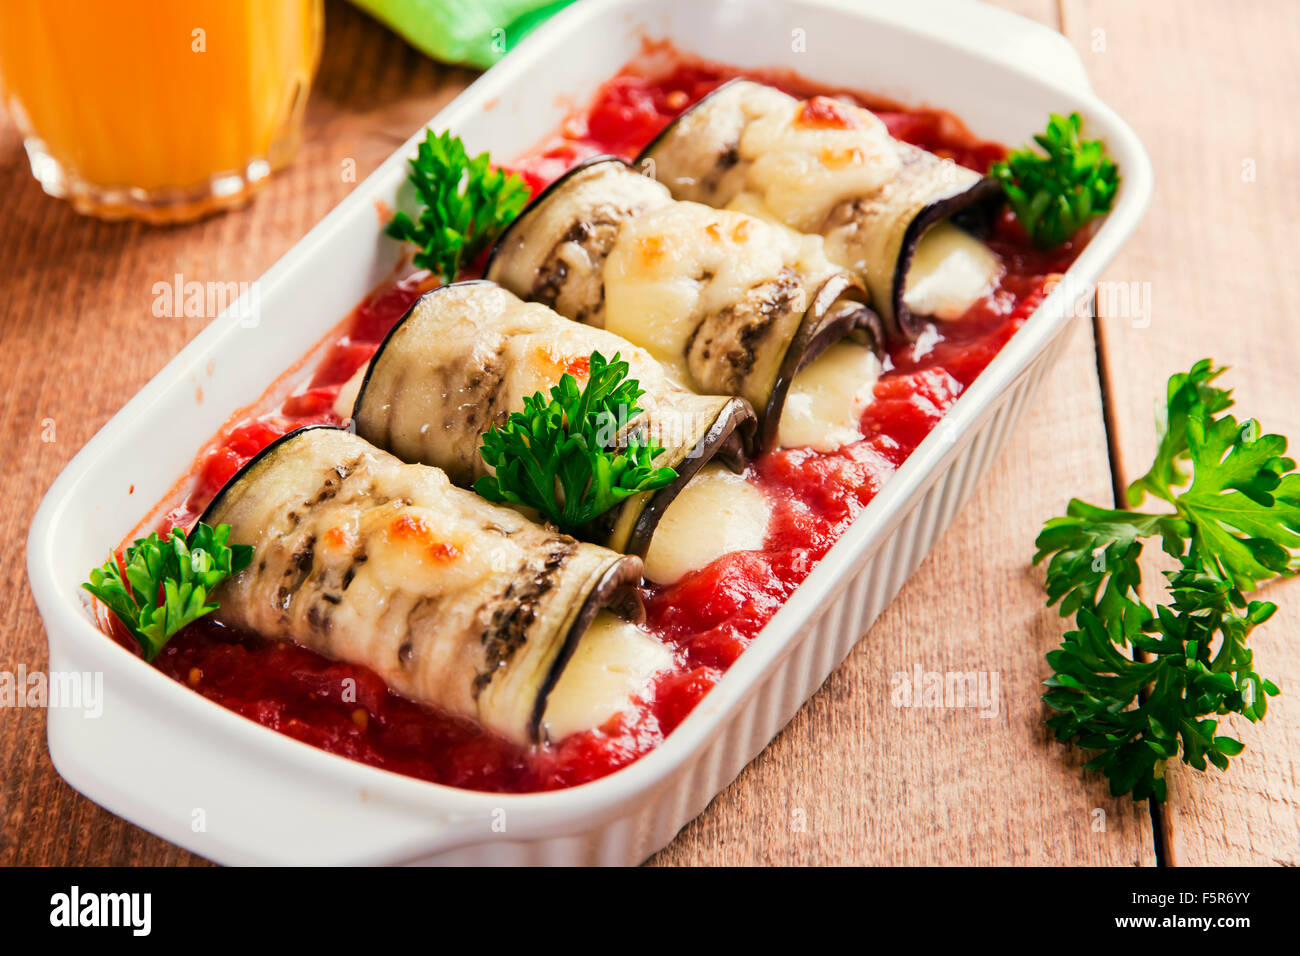 Baked eggplant with tomato sauce and cheese roll Stock Photo